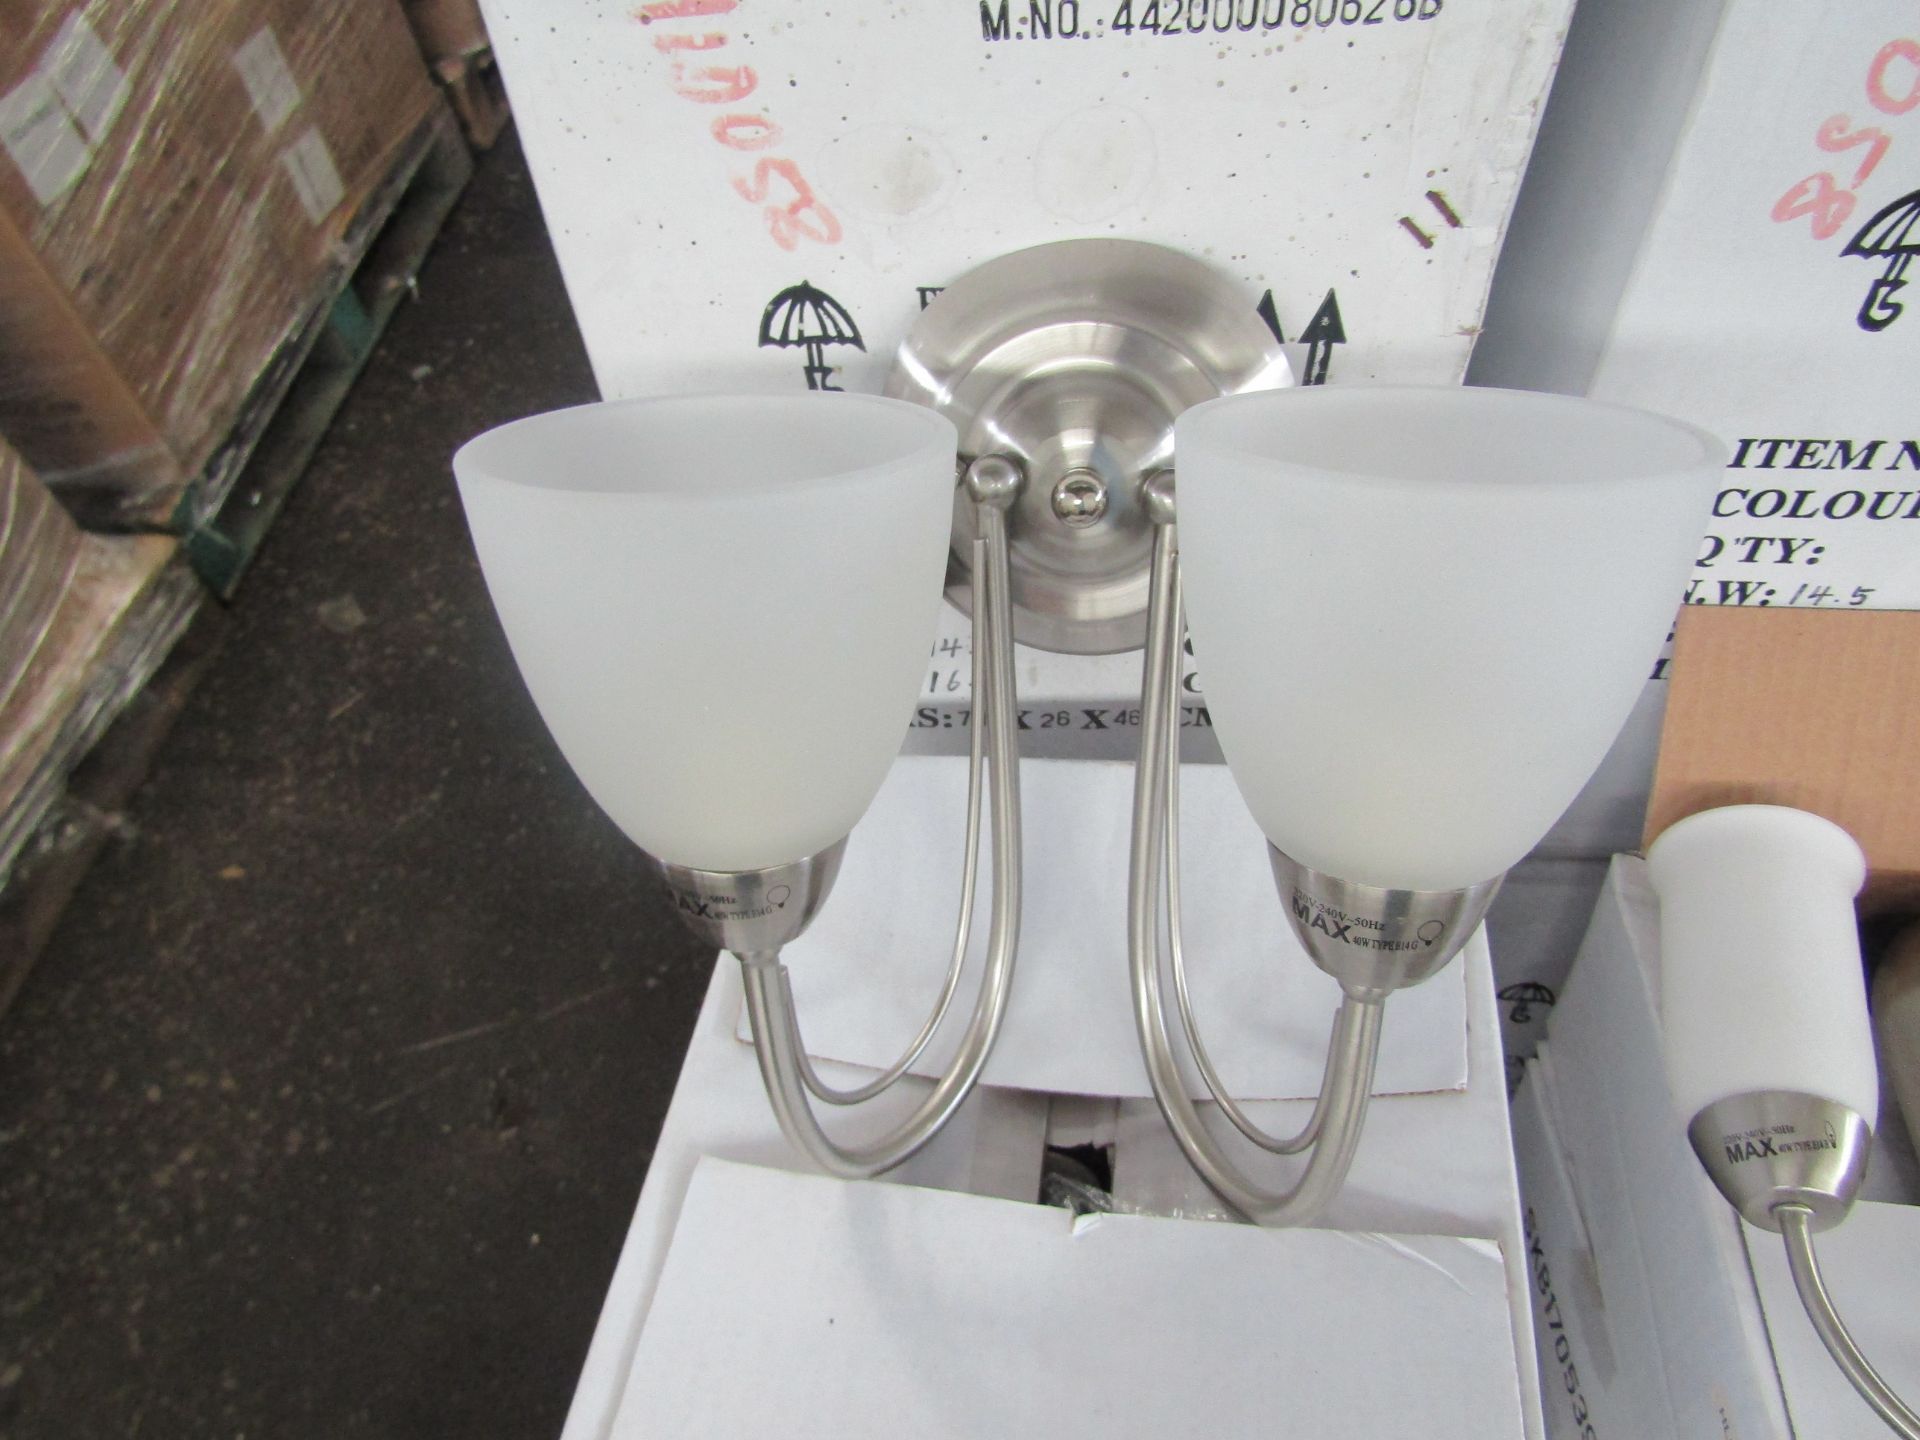 Satin Nickel 2 Arm Wall light fitting with frosted glass shades. H26cm x W24cm (boxes maybe shop